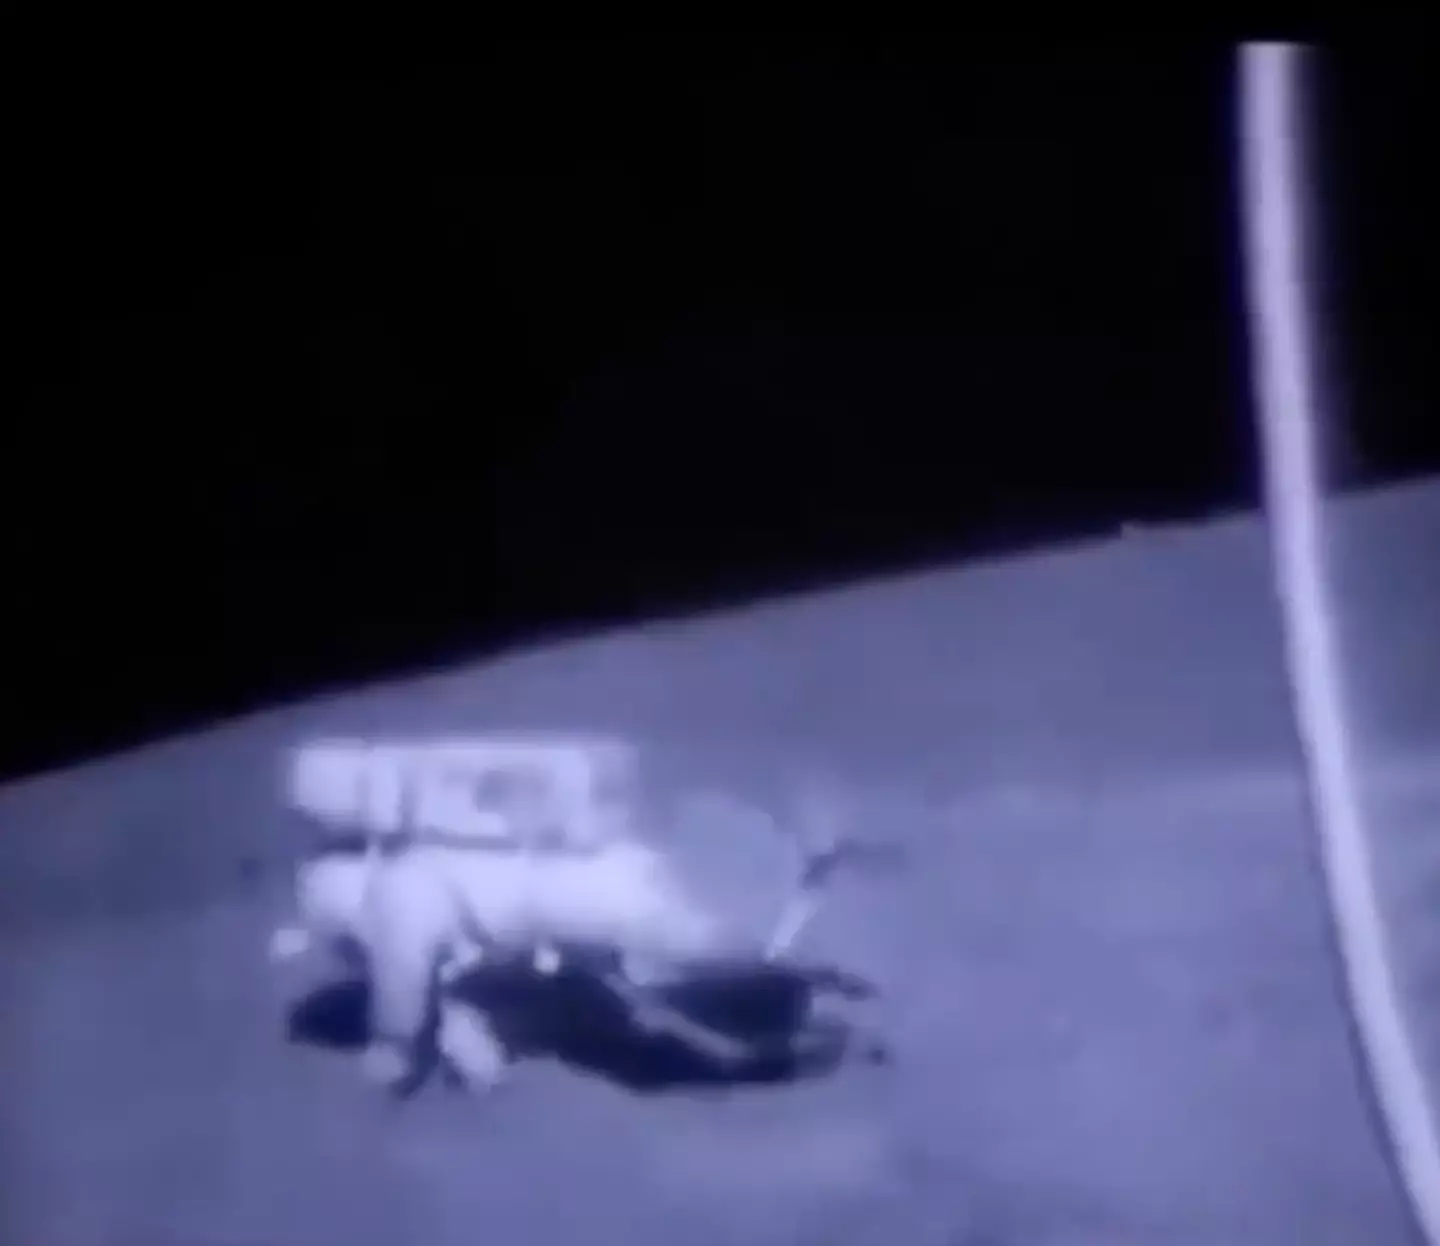 Stay on your feet, lads. (X/Historic Videos/NASA)